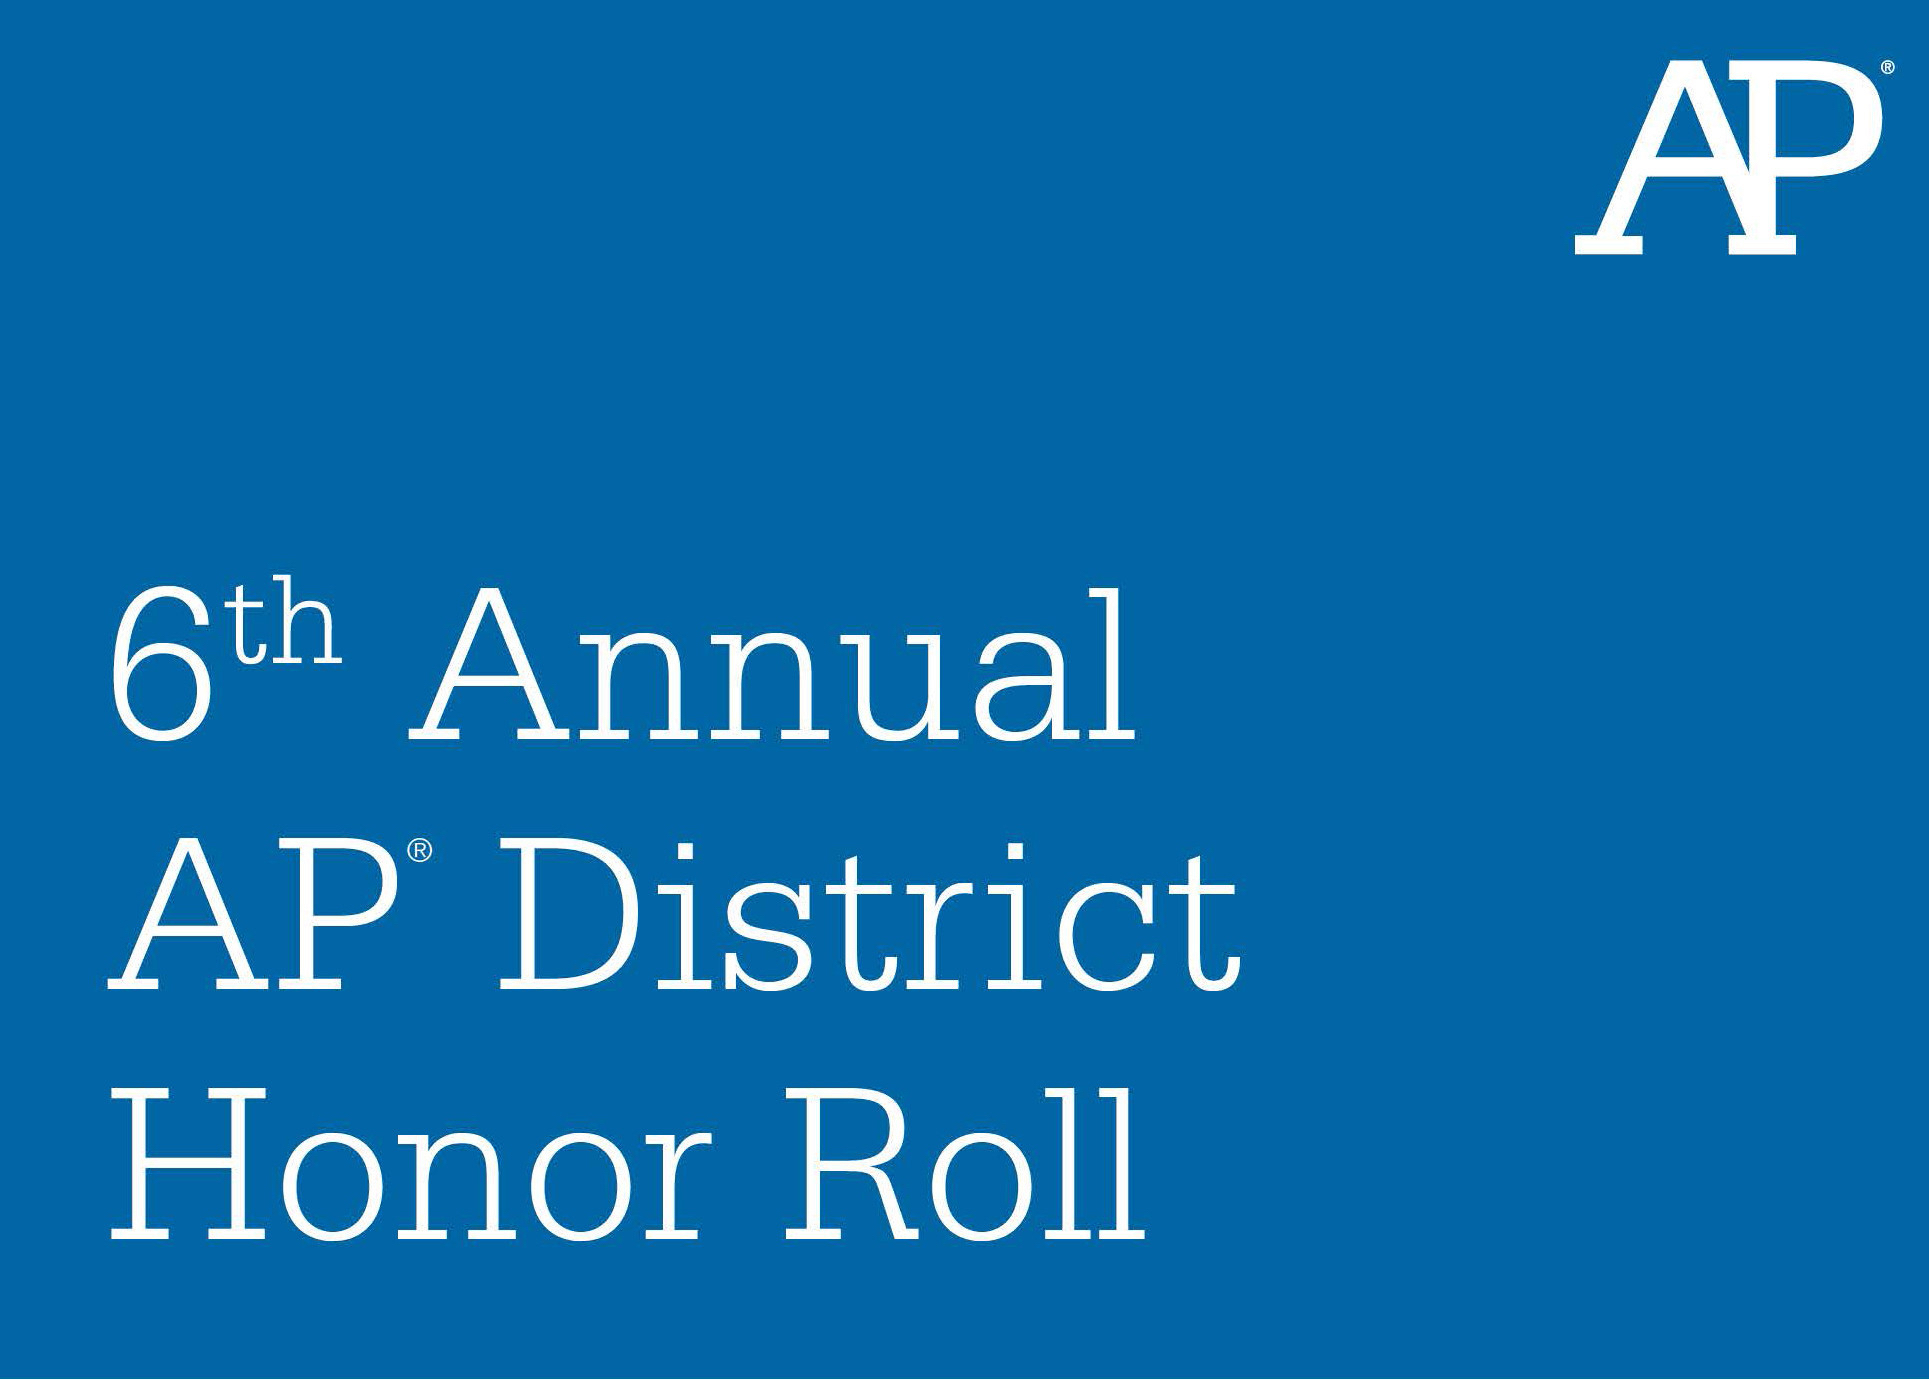 6th Annual AP District Honor Roll graphic